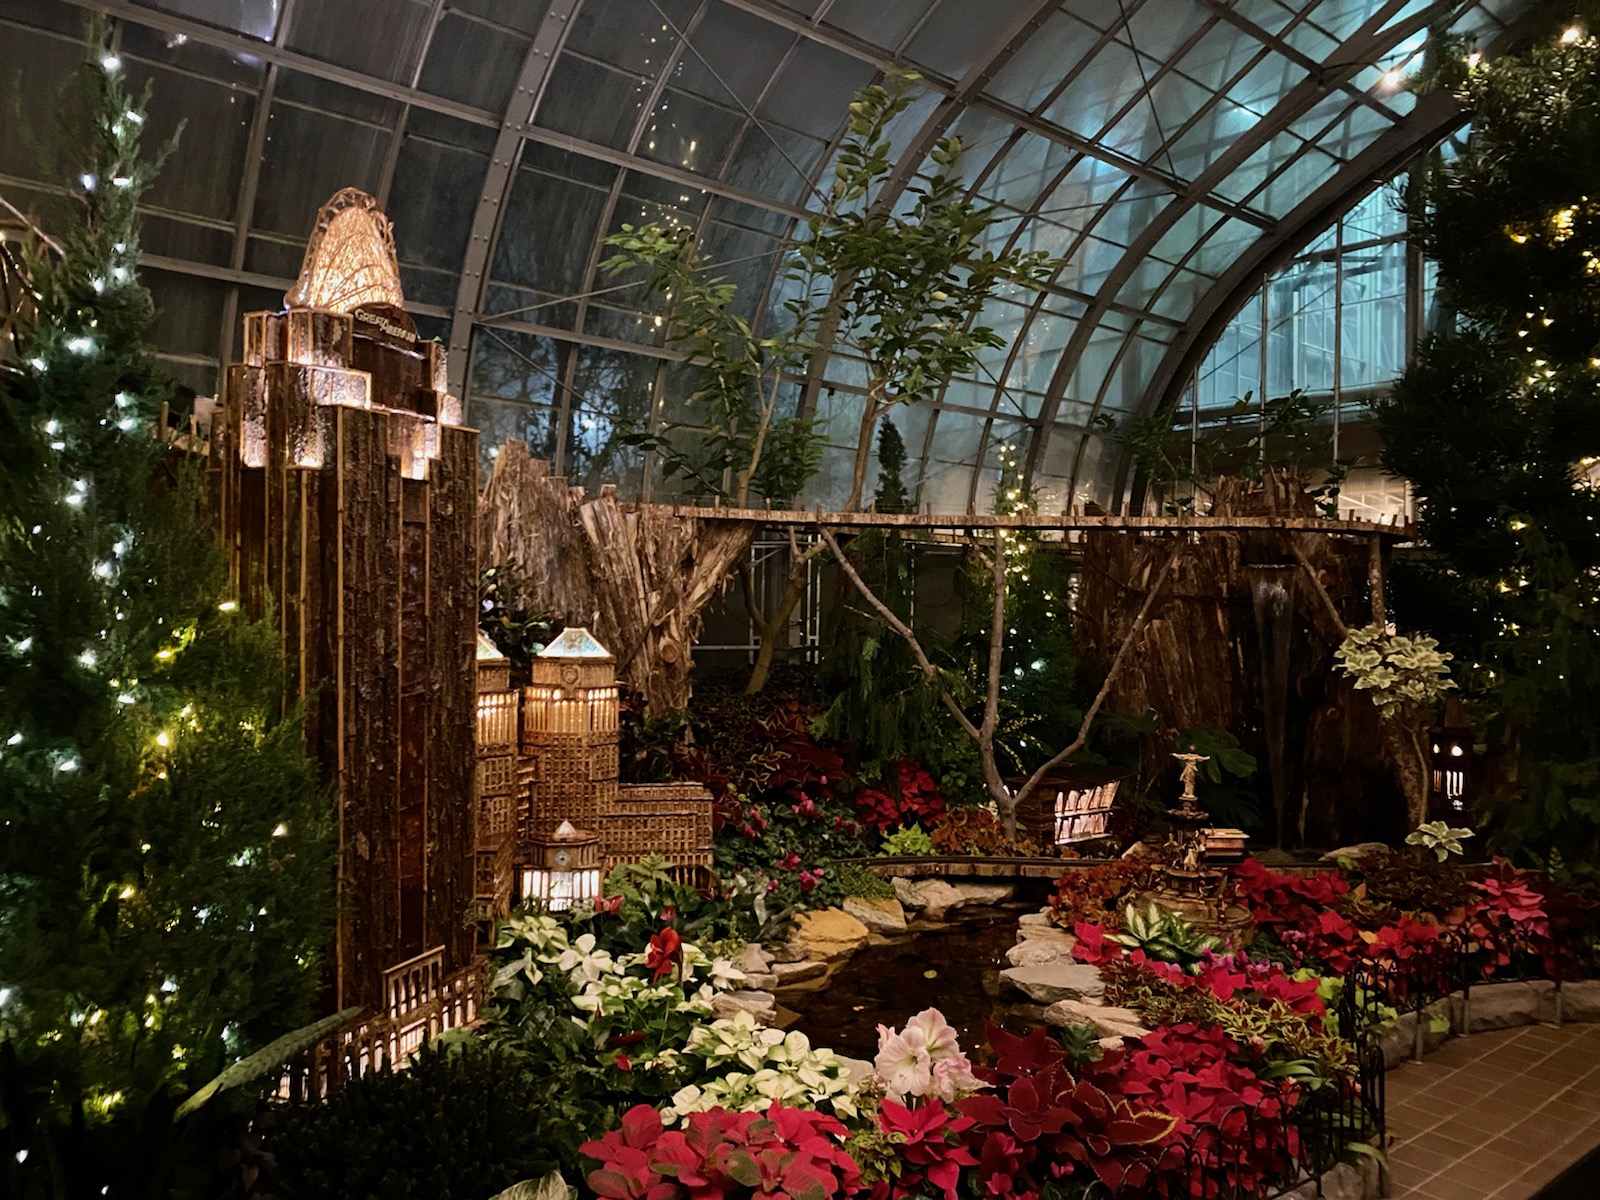 Krohn Conservatory comes to life for holiday season